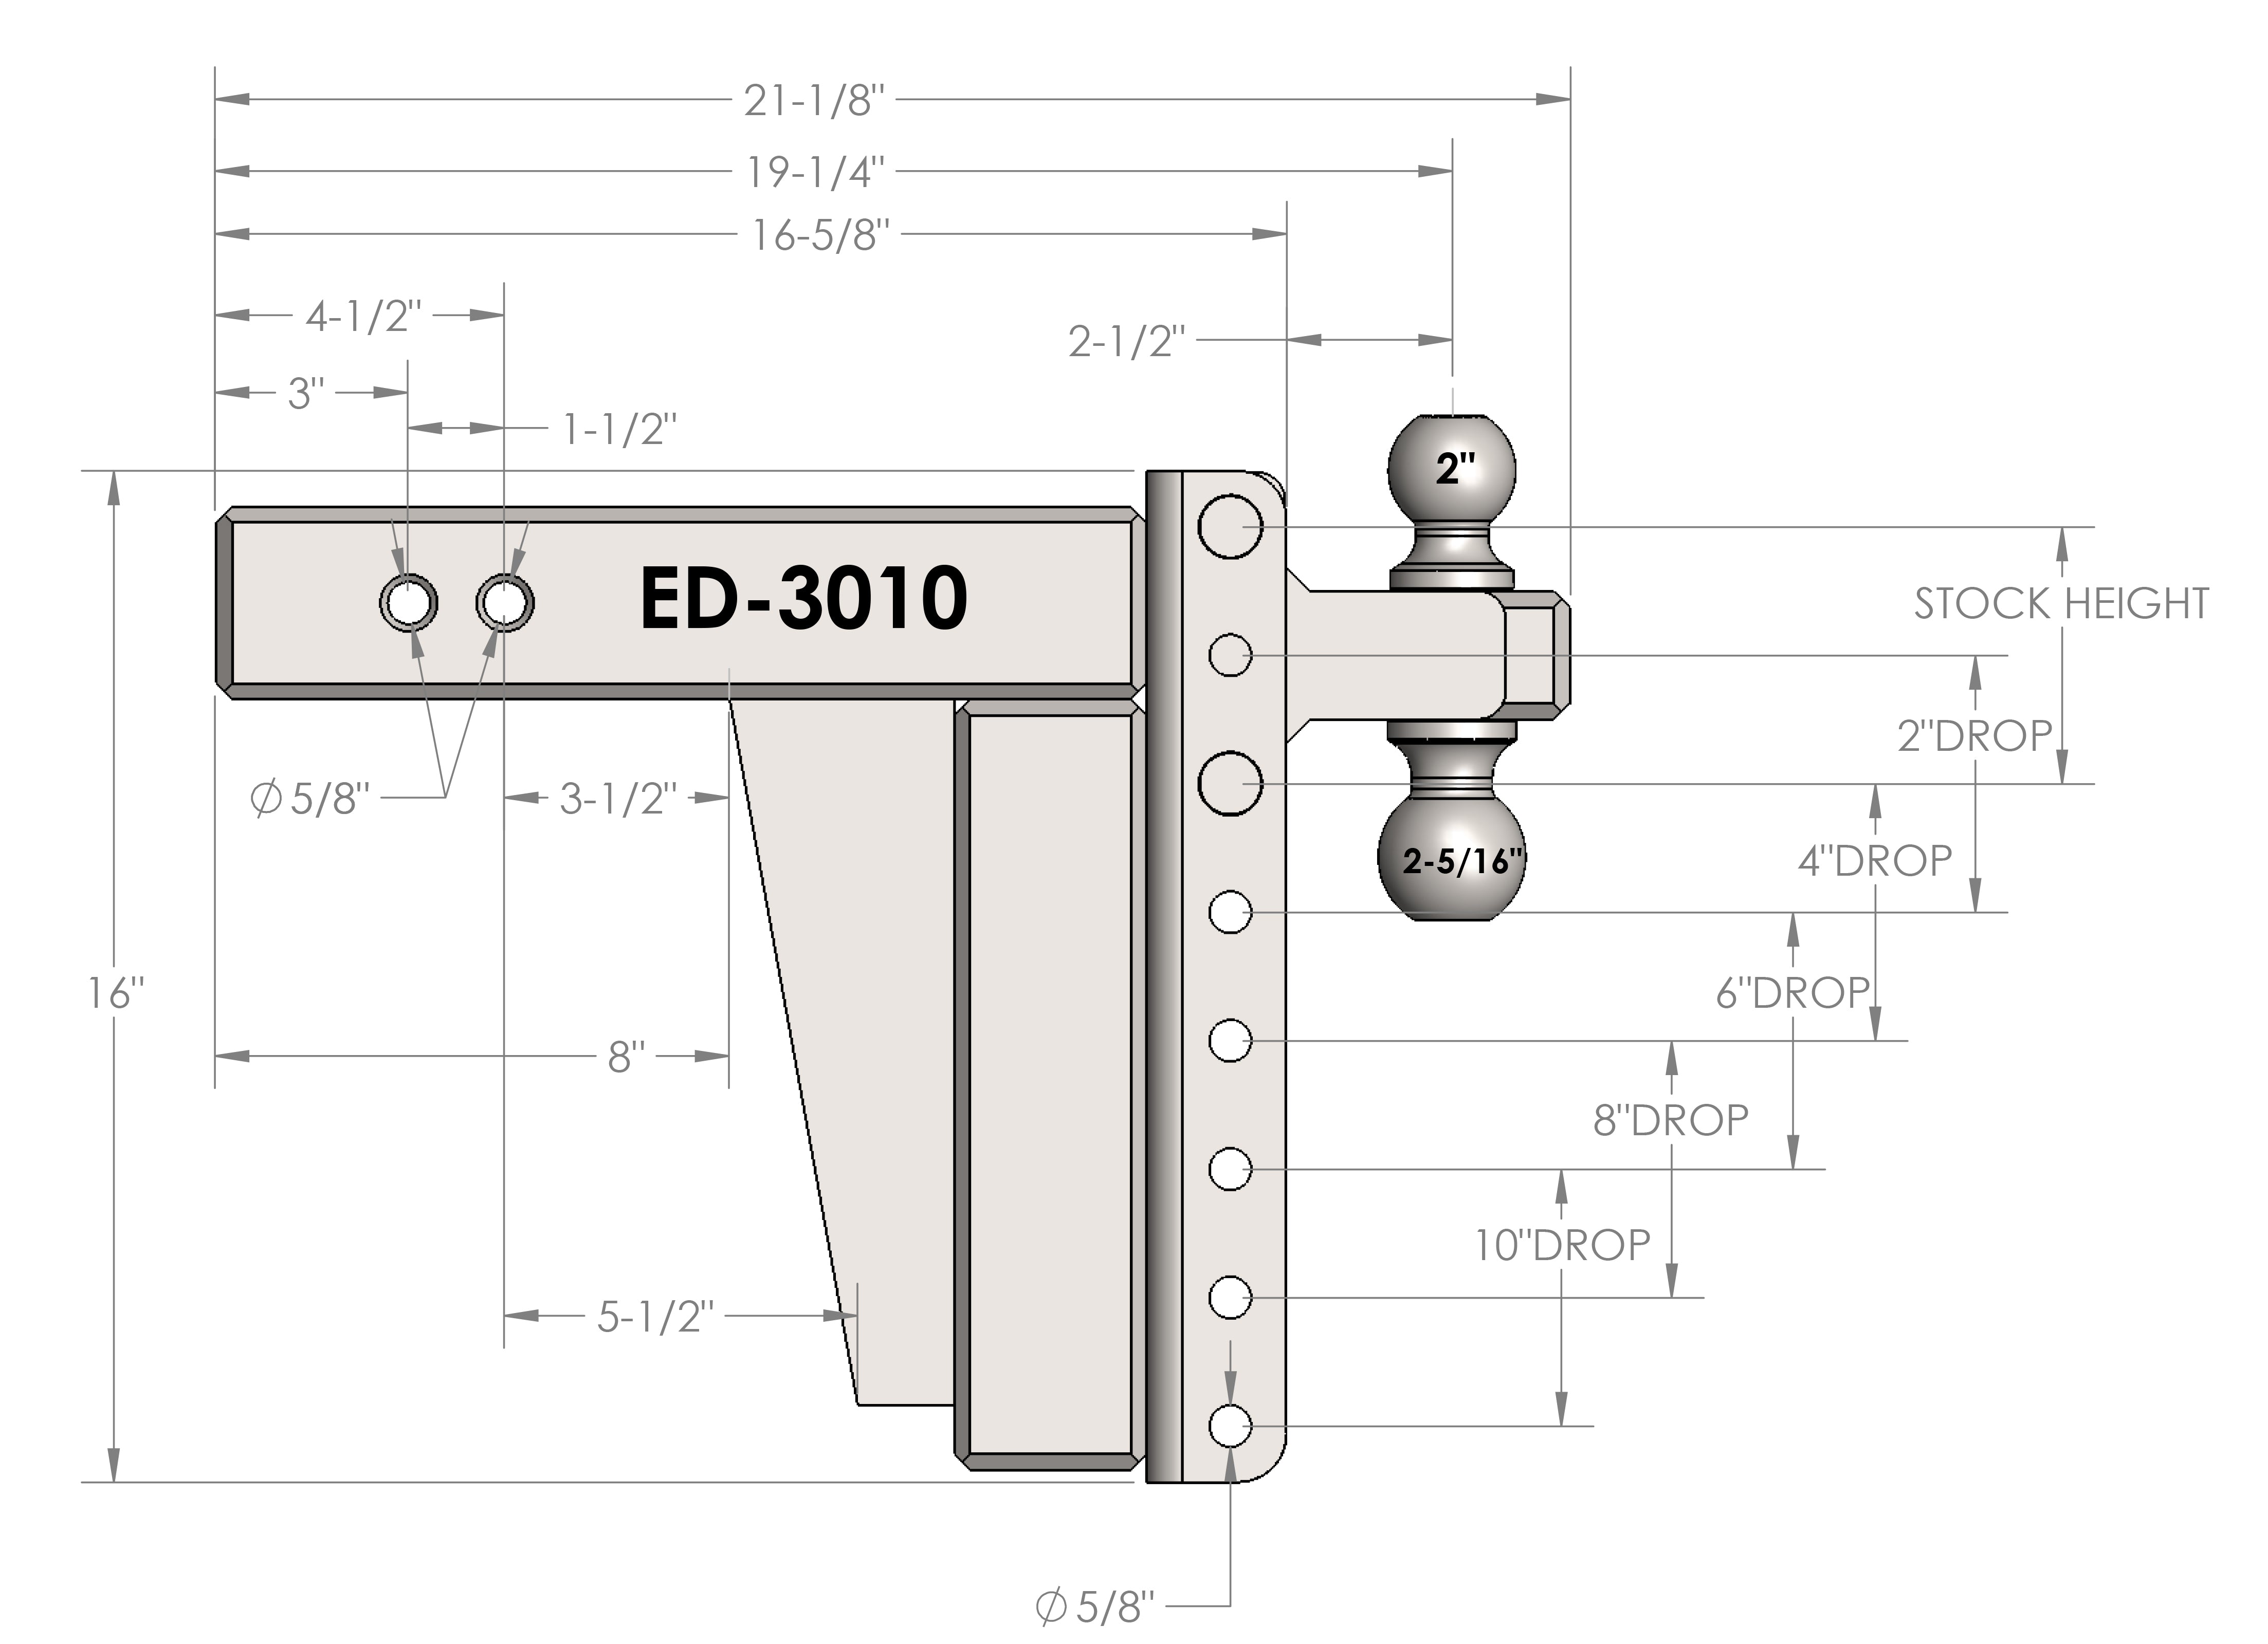 3.0" Extreme Duty 10" Drop/Rise Hitch Design Specification